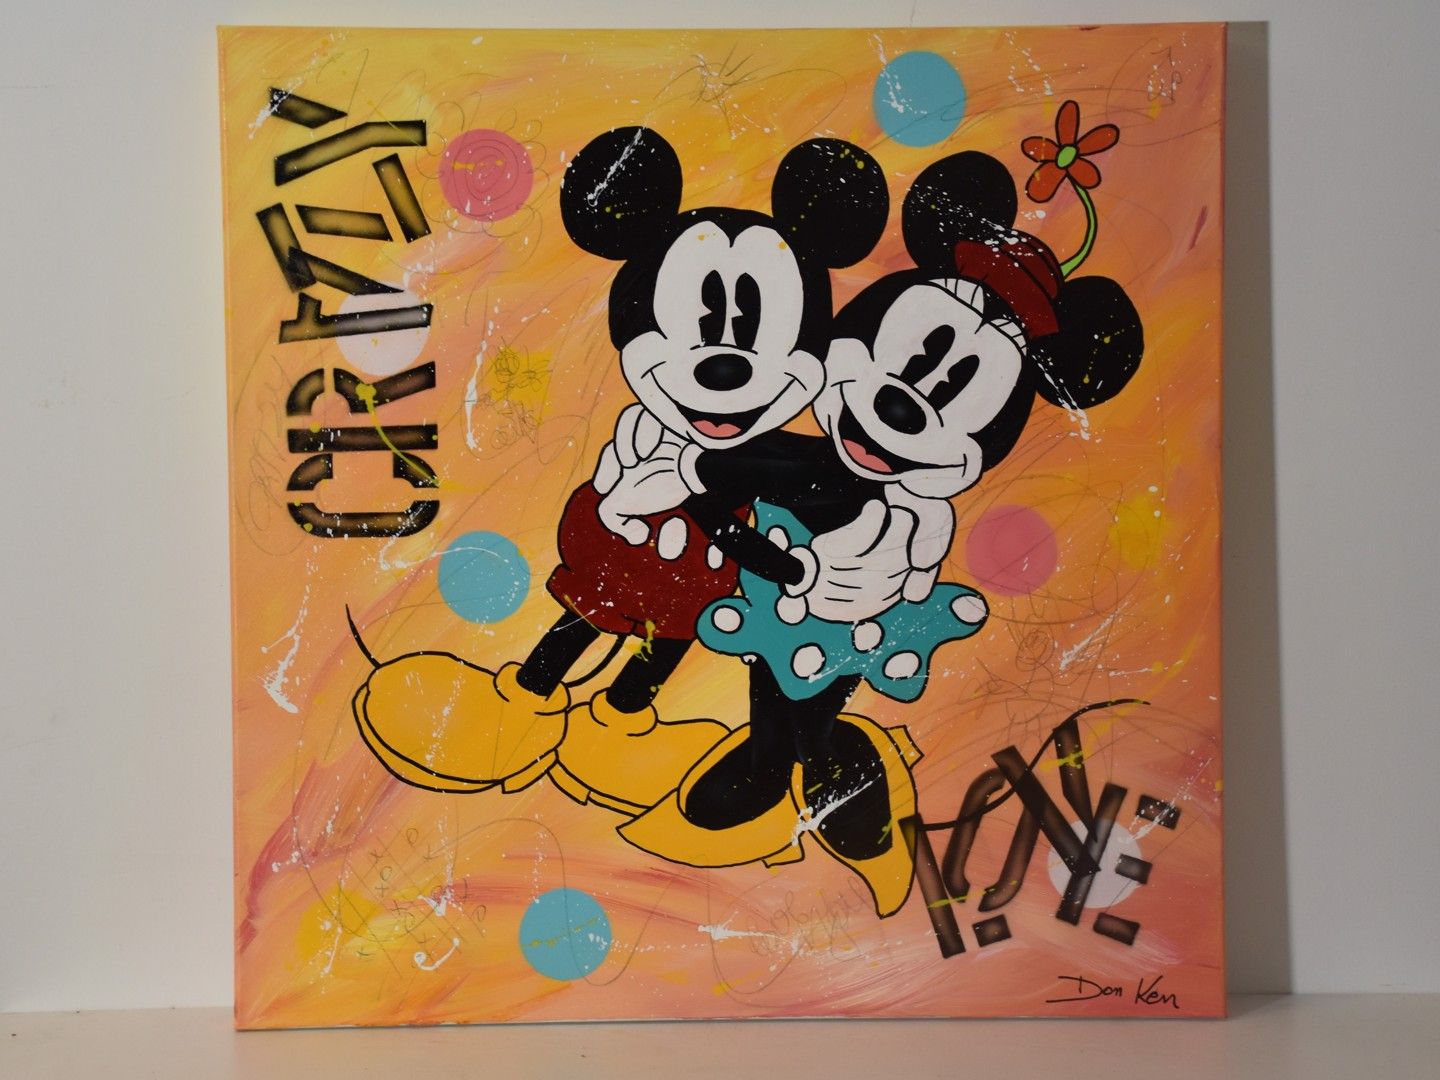 Null Painting acrylic on canvas signed DON KEN [1956- ] "Crazy love" dim. 80 x 8&hellip;